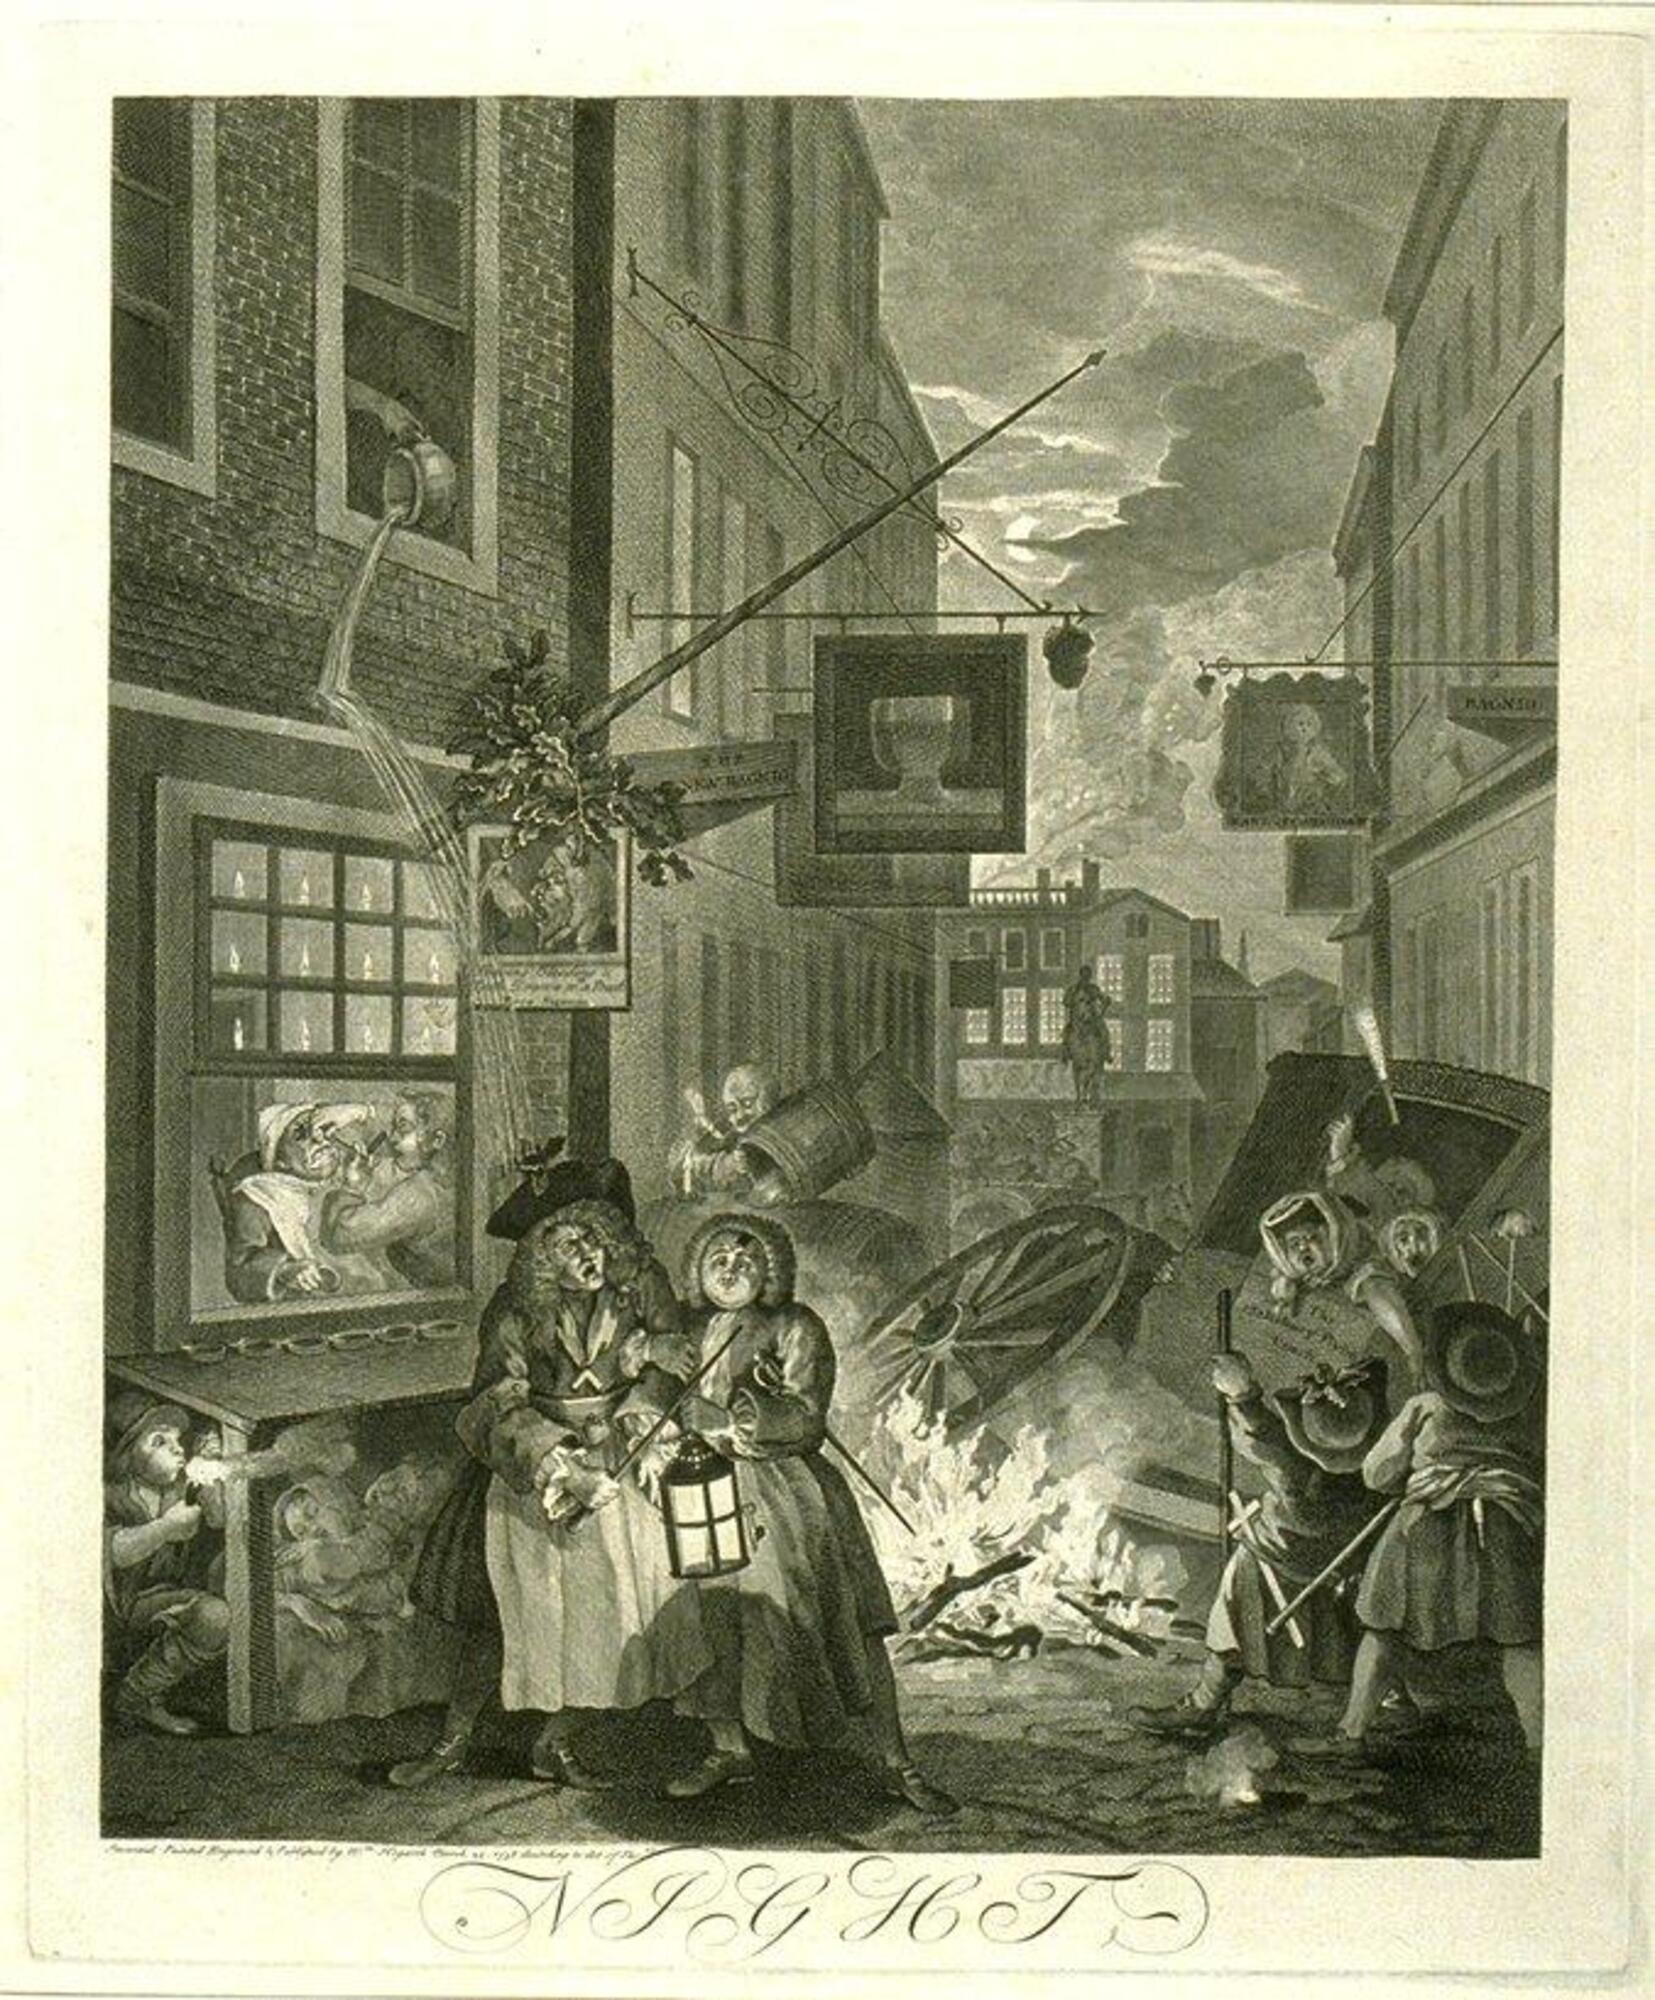 This print is vertically oriented with gray markings. A cream border surrounds it and it has &ldquo;NIGHT&rdquo; written below it. The lower half of the print has a busy street scene with lots of people taking parts of several stories (e.g. someone empting a chamber pot on people on the street, a tipped over carriage that is being set on fire, a quack doctor performing an operation in a candlelit room). The upper half of the print shows the tops of the buildings that line the street, iron-wrought shop signs, a statue of a man on horseback in the distance, and a crescent moon in a cloudy sky.